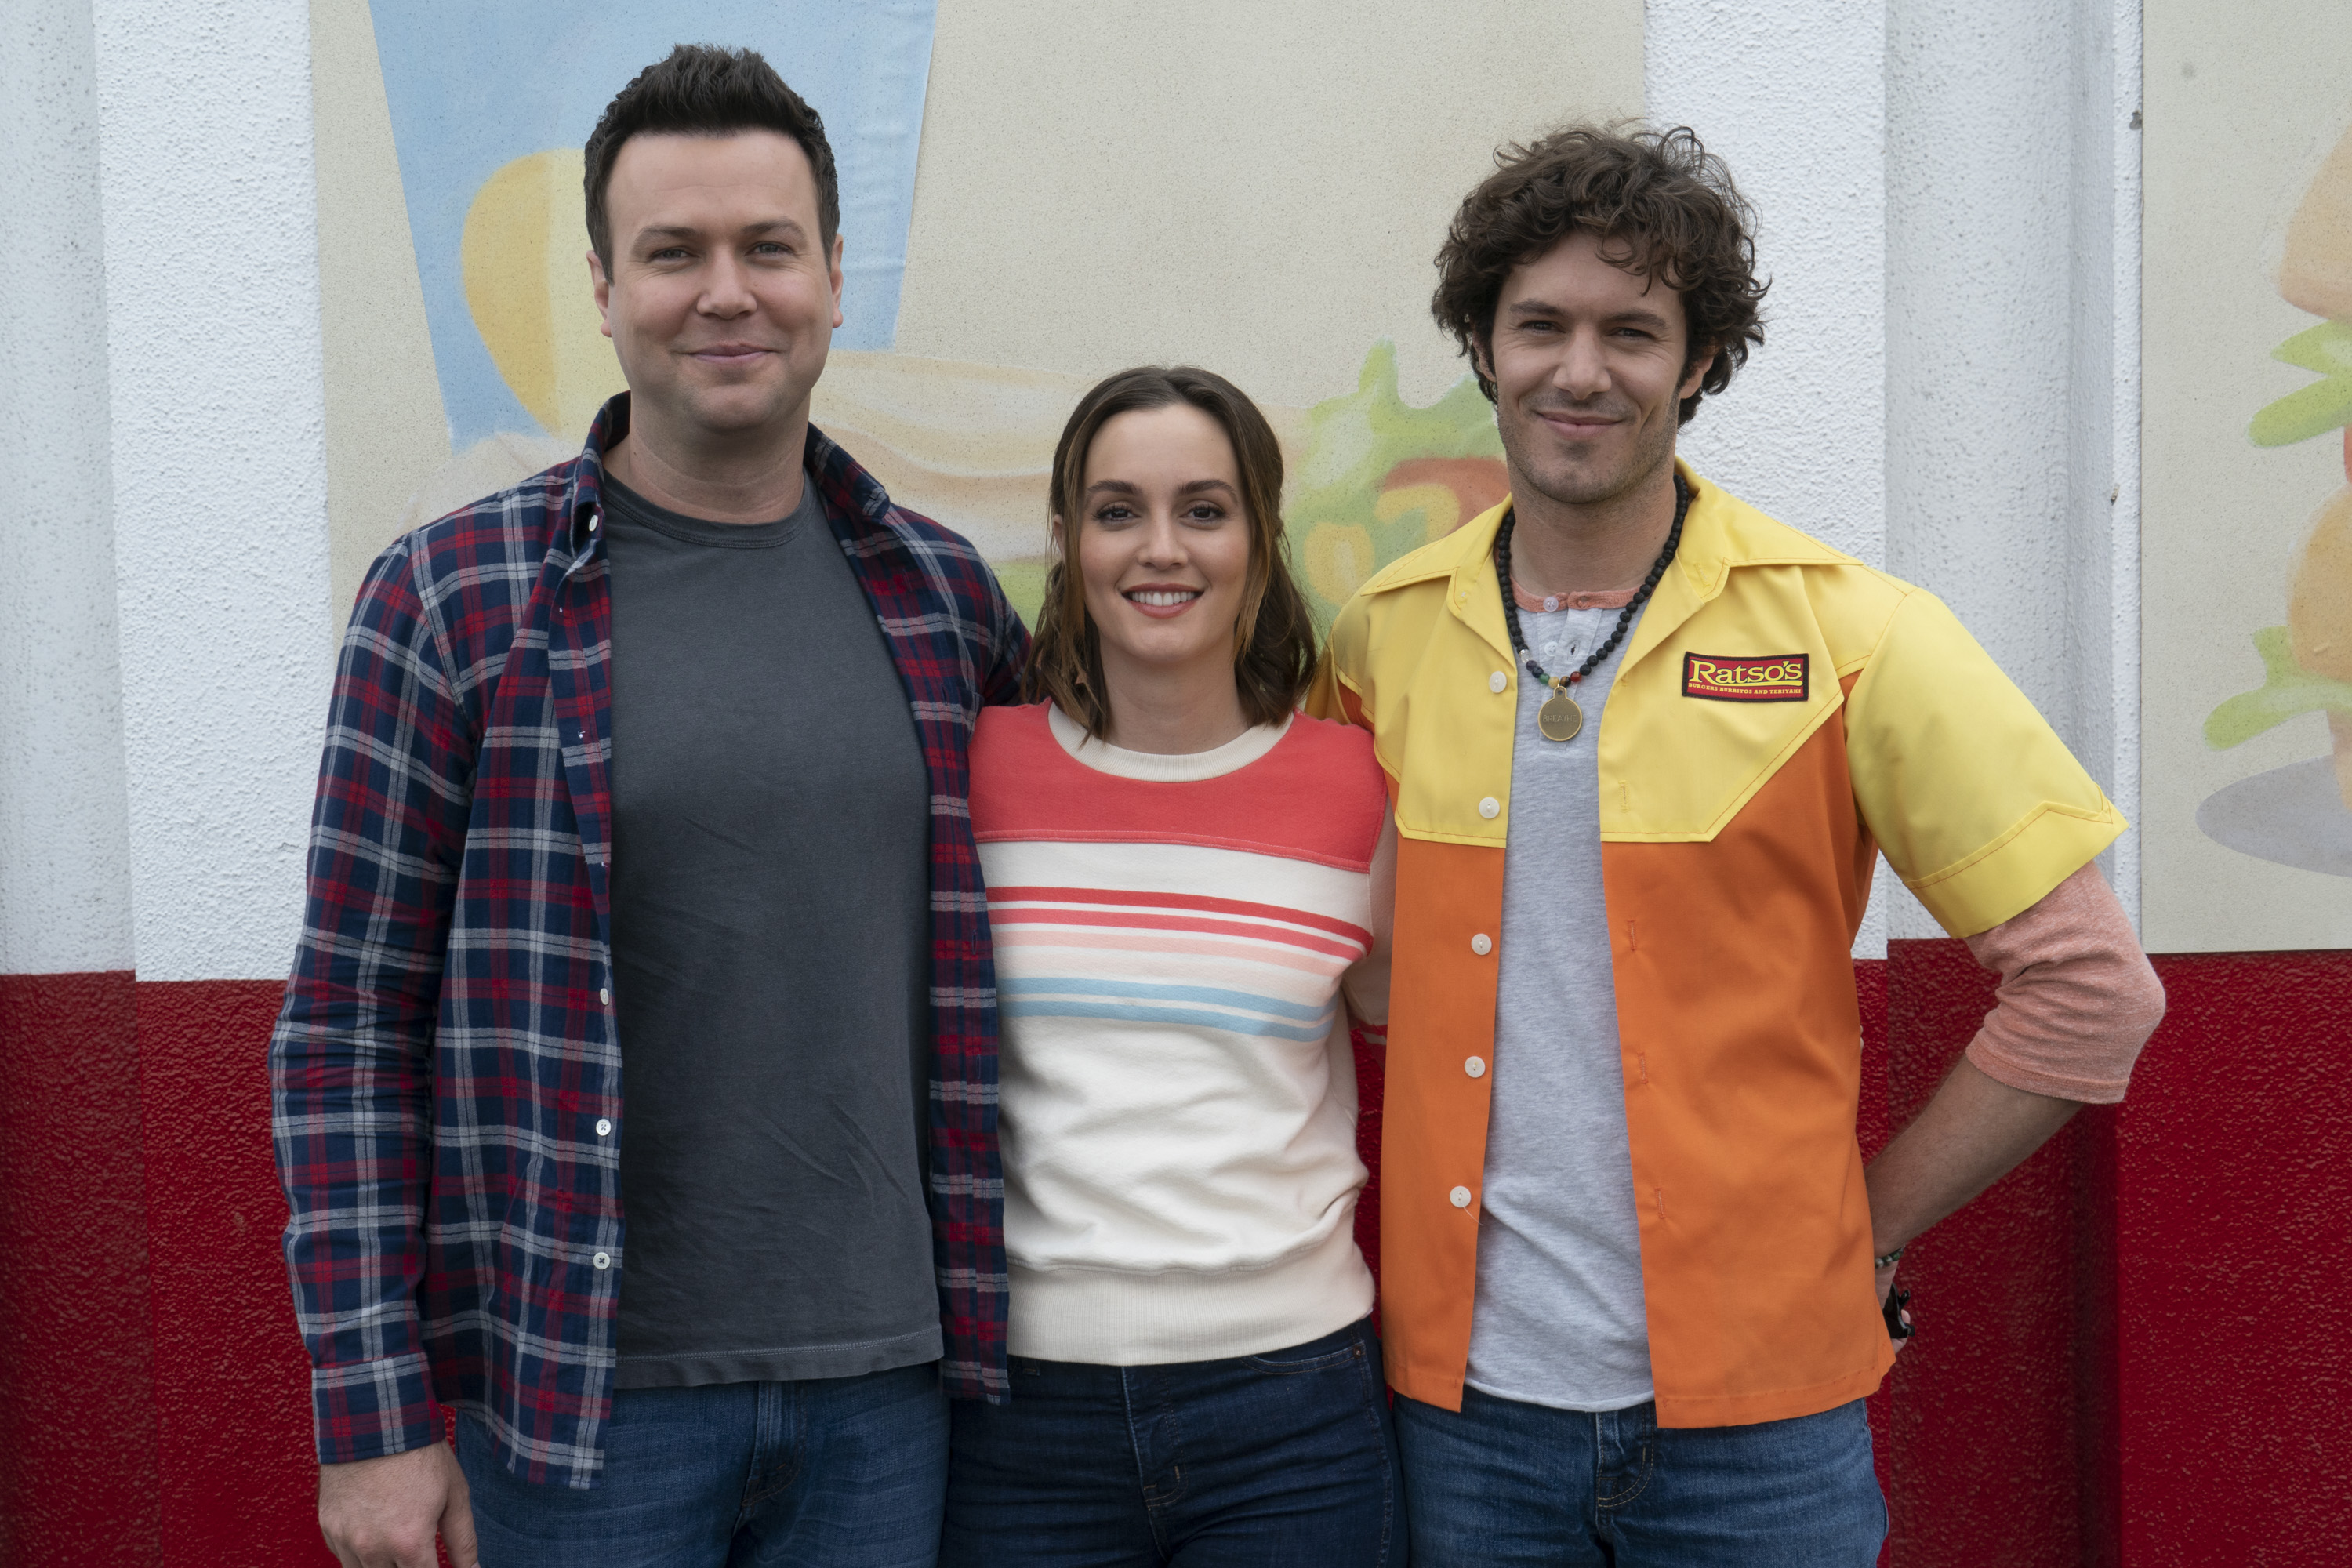 Leighton Meester and Taran Killam, Leighton Meester, and Adam Brody on the set of ABC's 2019 series "Single Parents." | Source: Getty Images